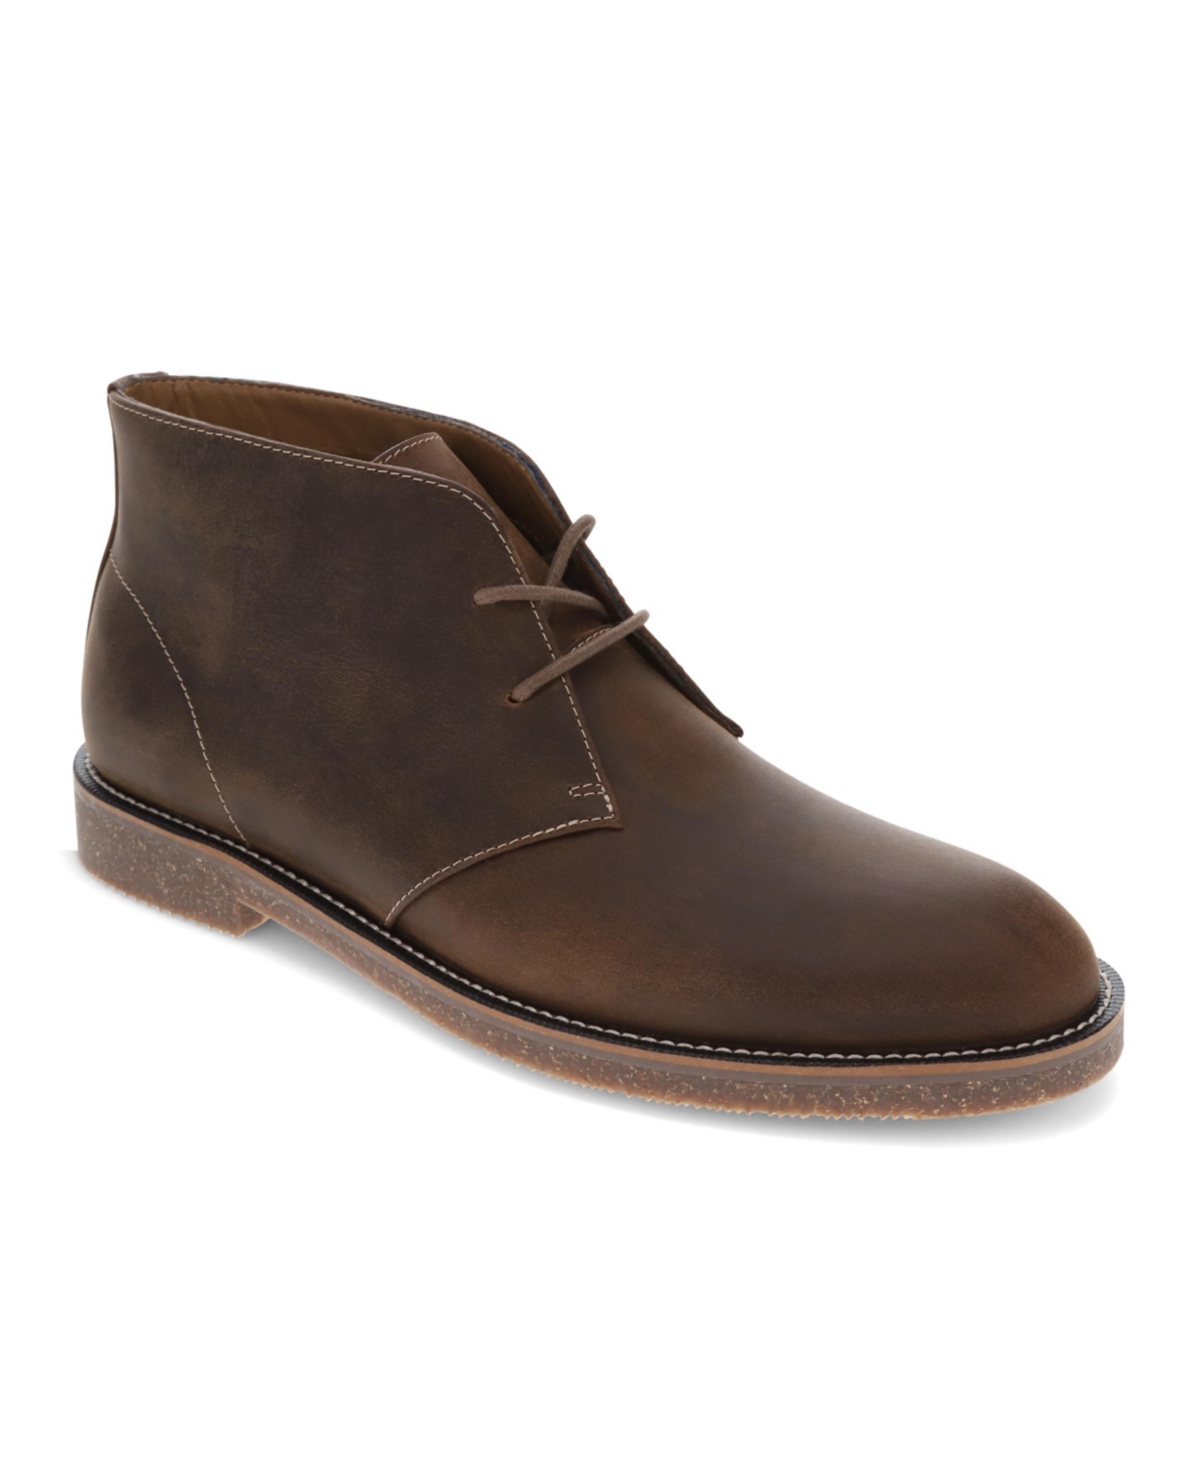 Men's Nigel Lace Up Boots - Taupe